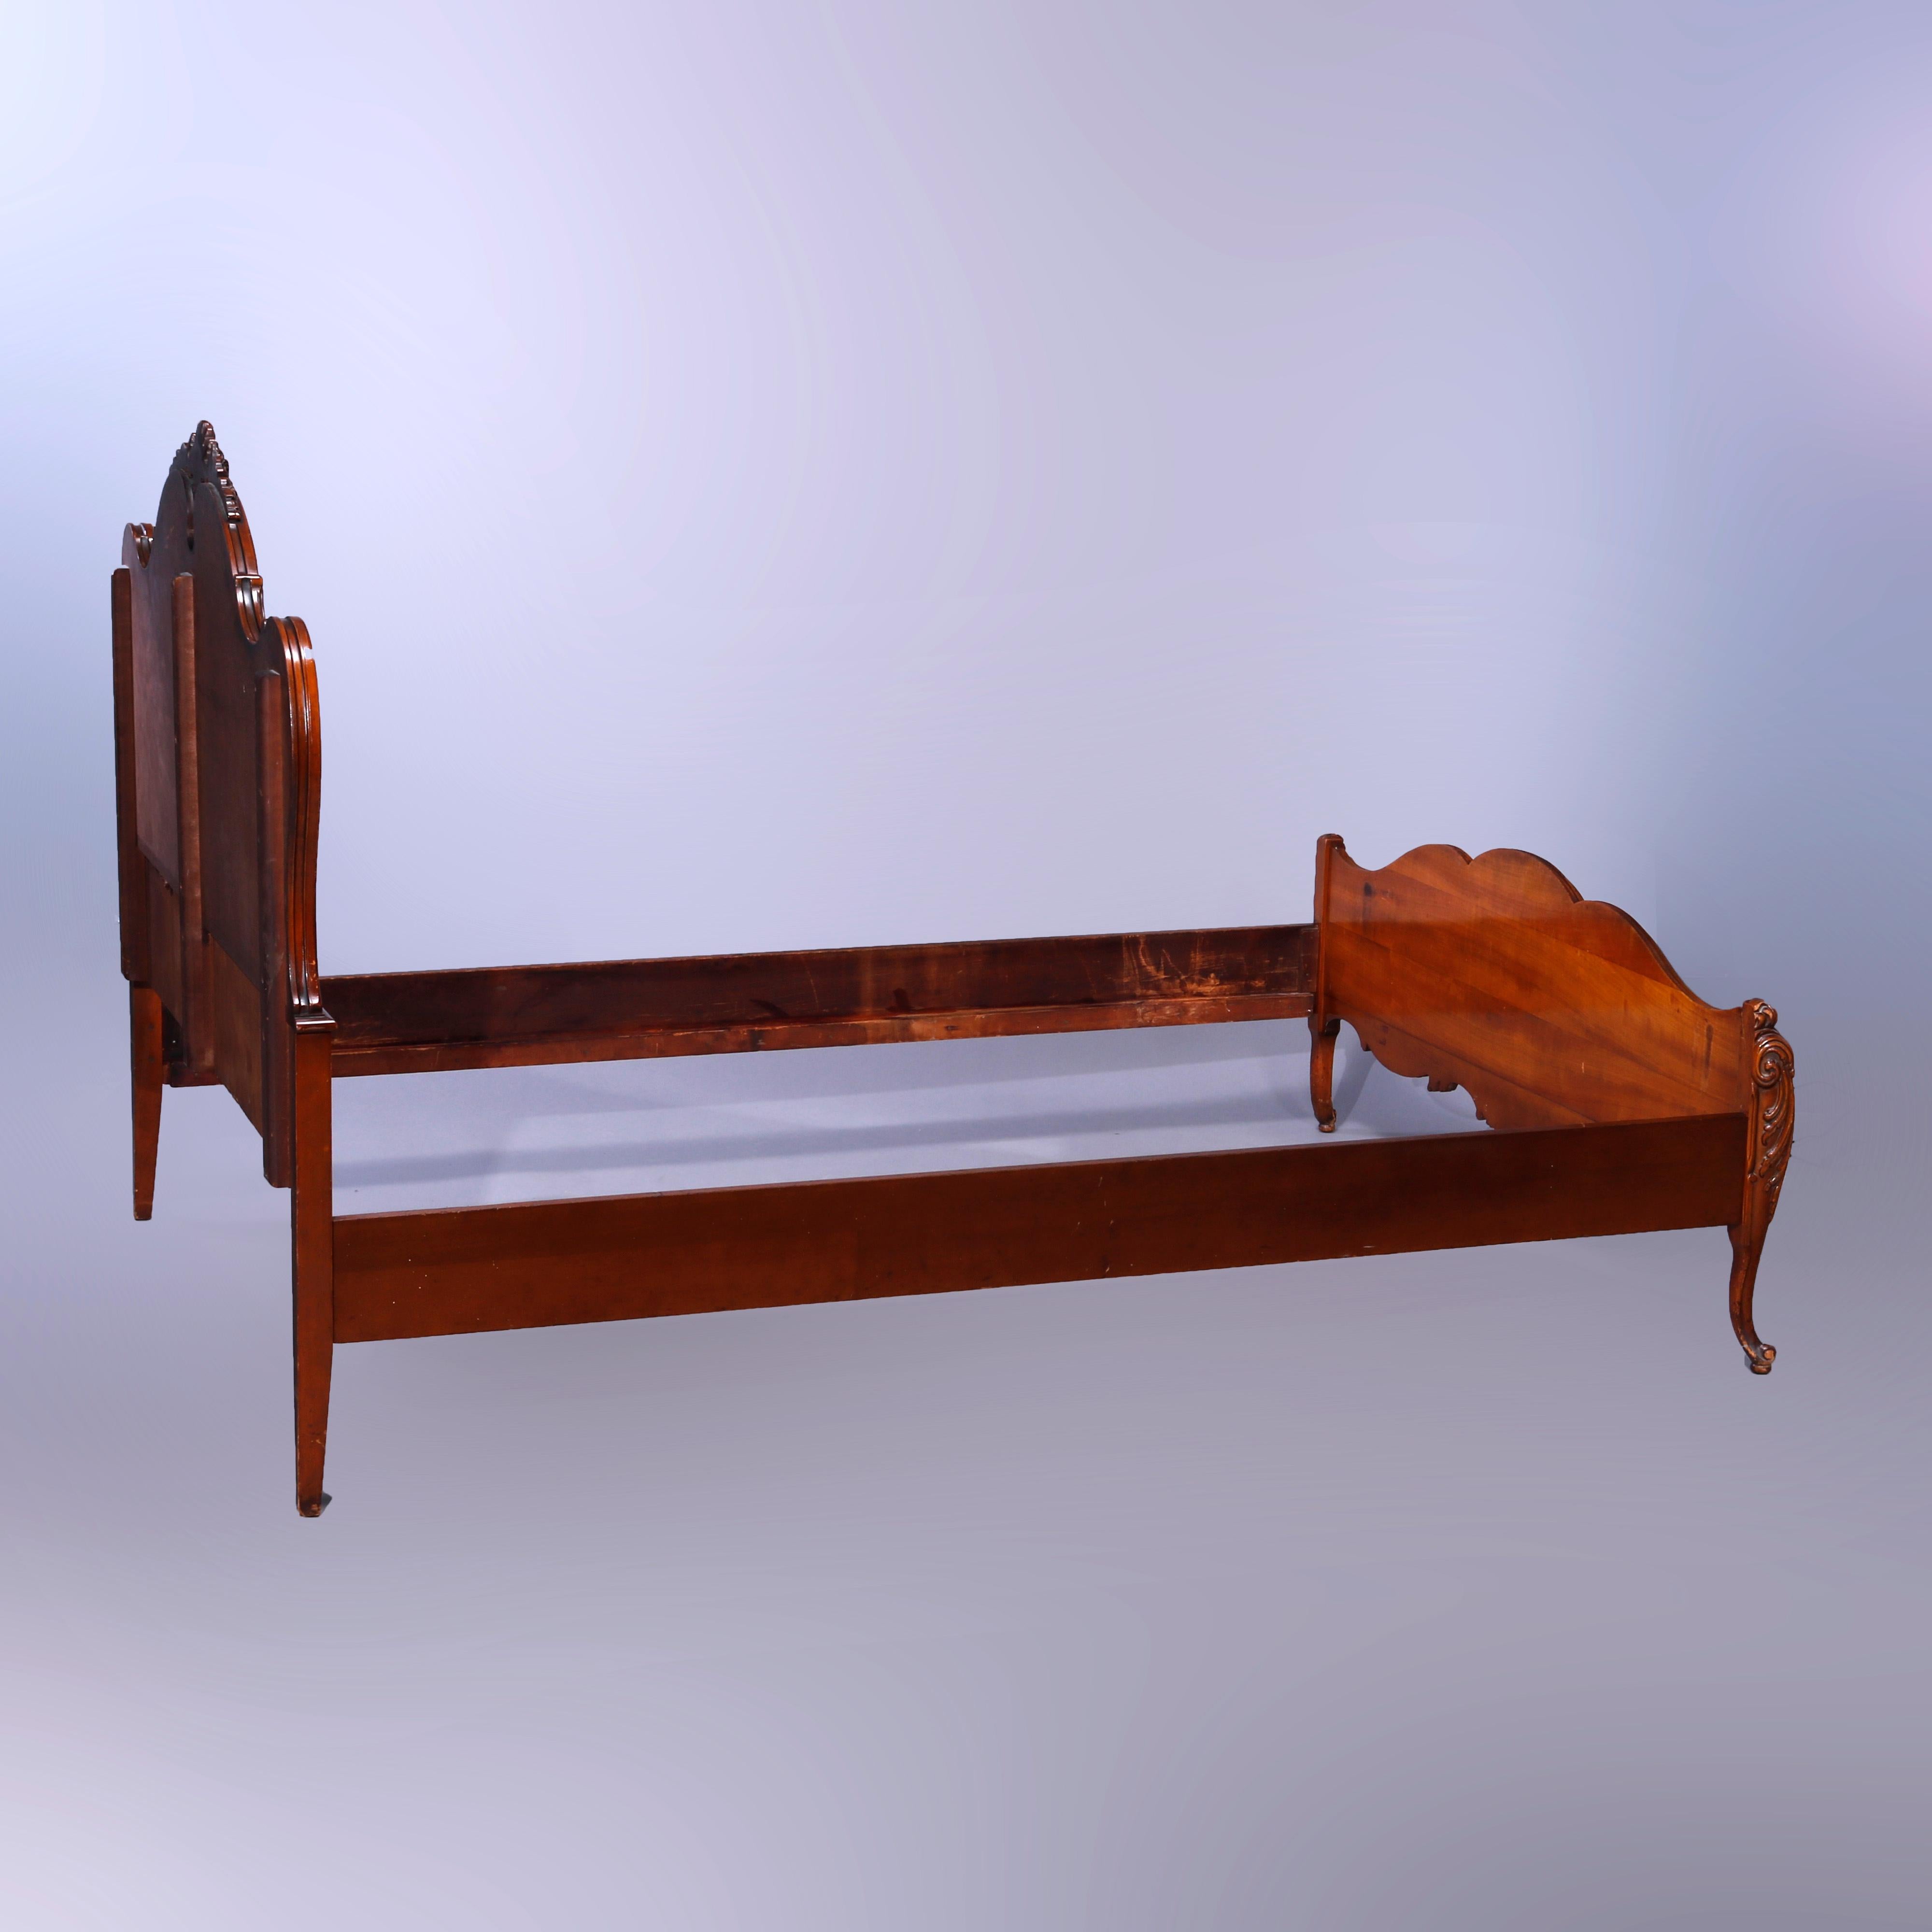 20th Century Antique French Carved Mahogany, Satinwood & Marquetry Inlay Double Bed c1910